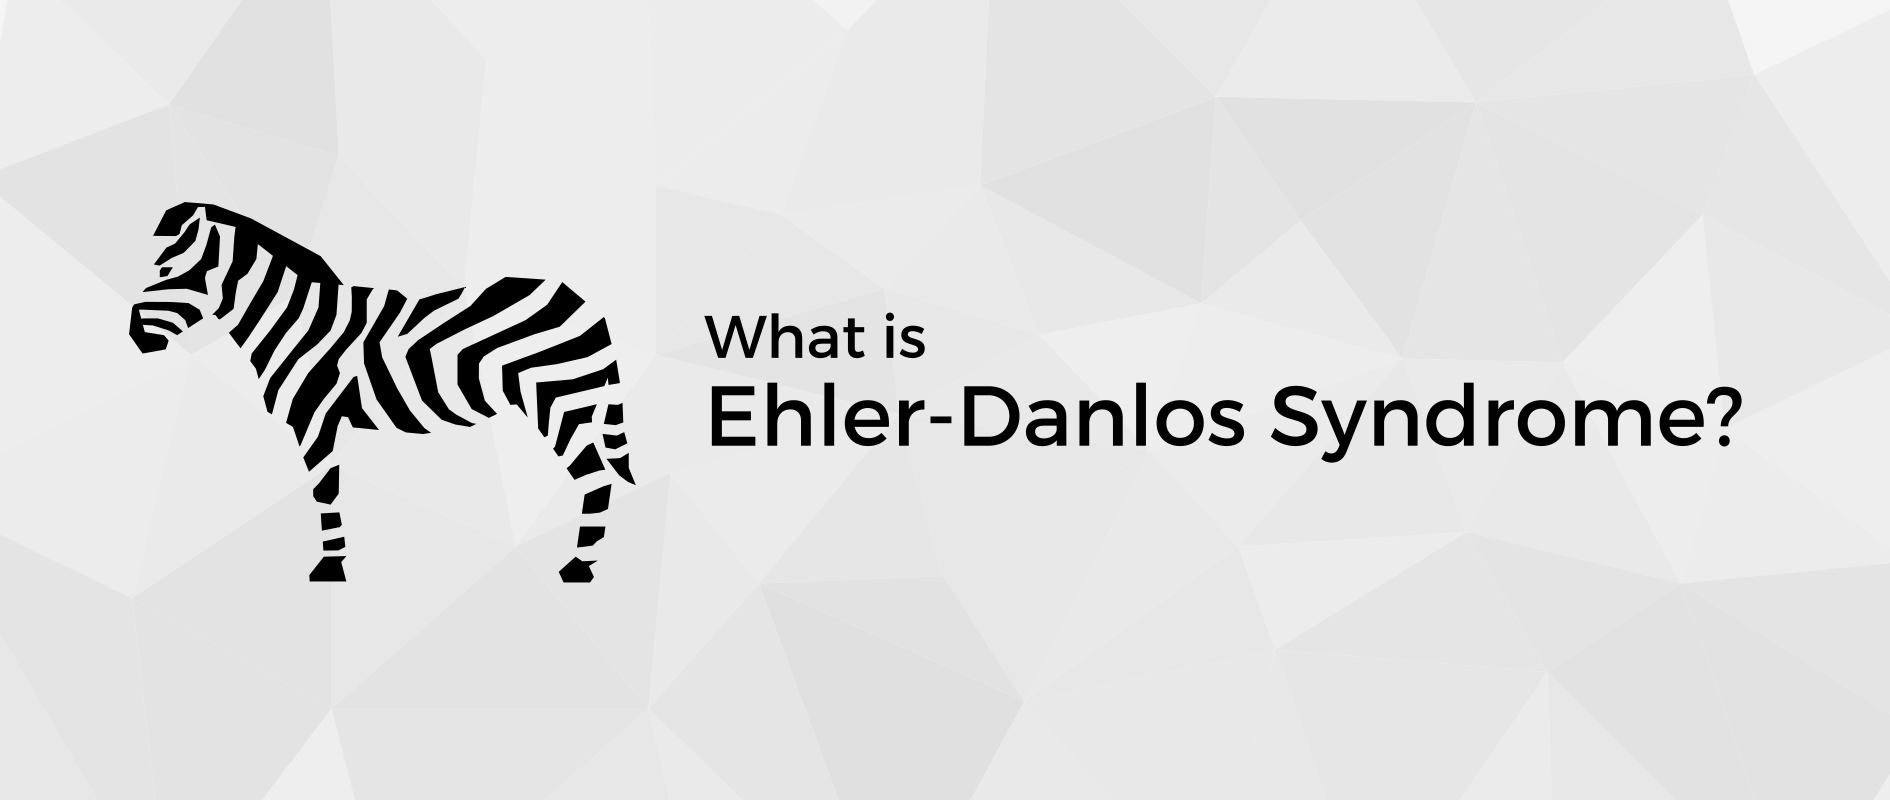 What is Ehler-Danlos Syndrome?